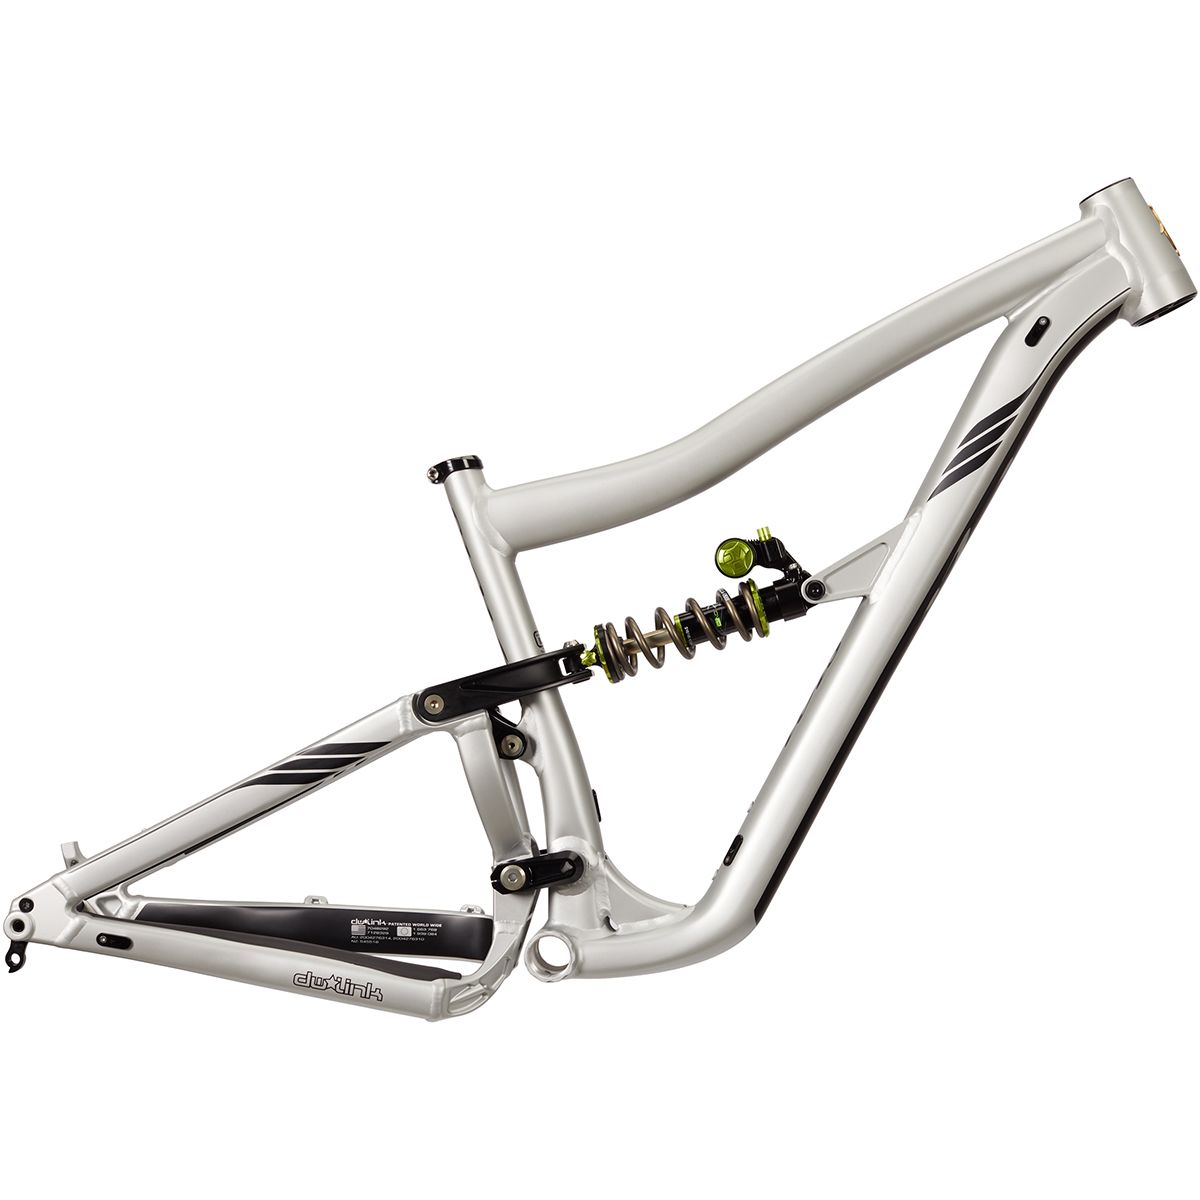 Ripmo AF Coil Mountain Bike Frame by Ibis US-Parks